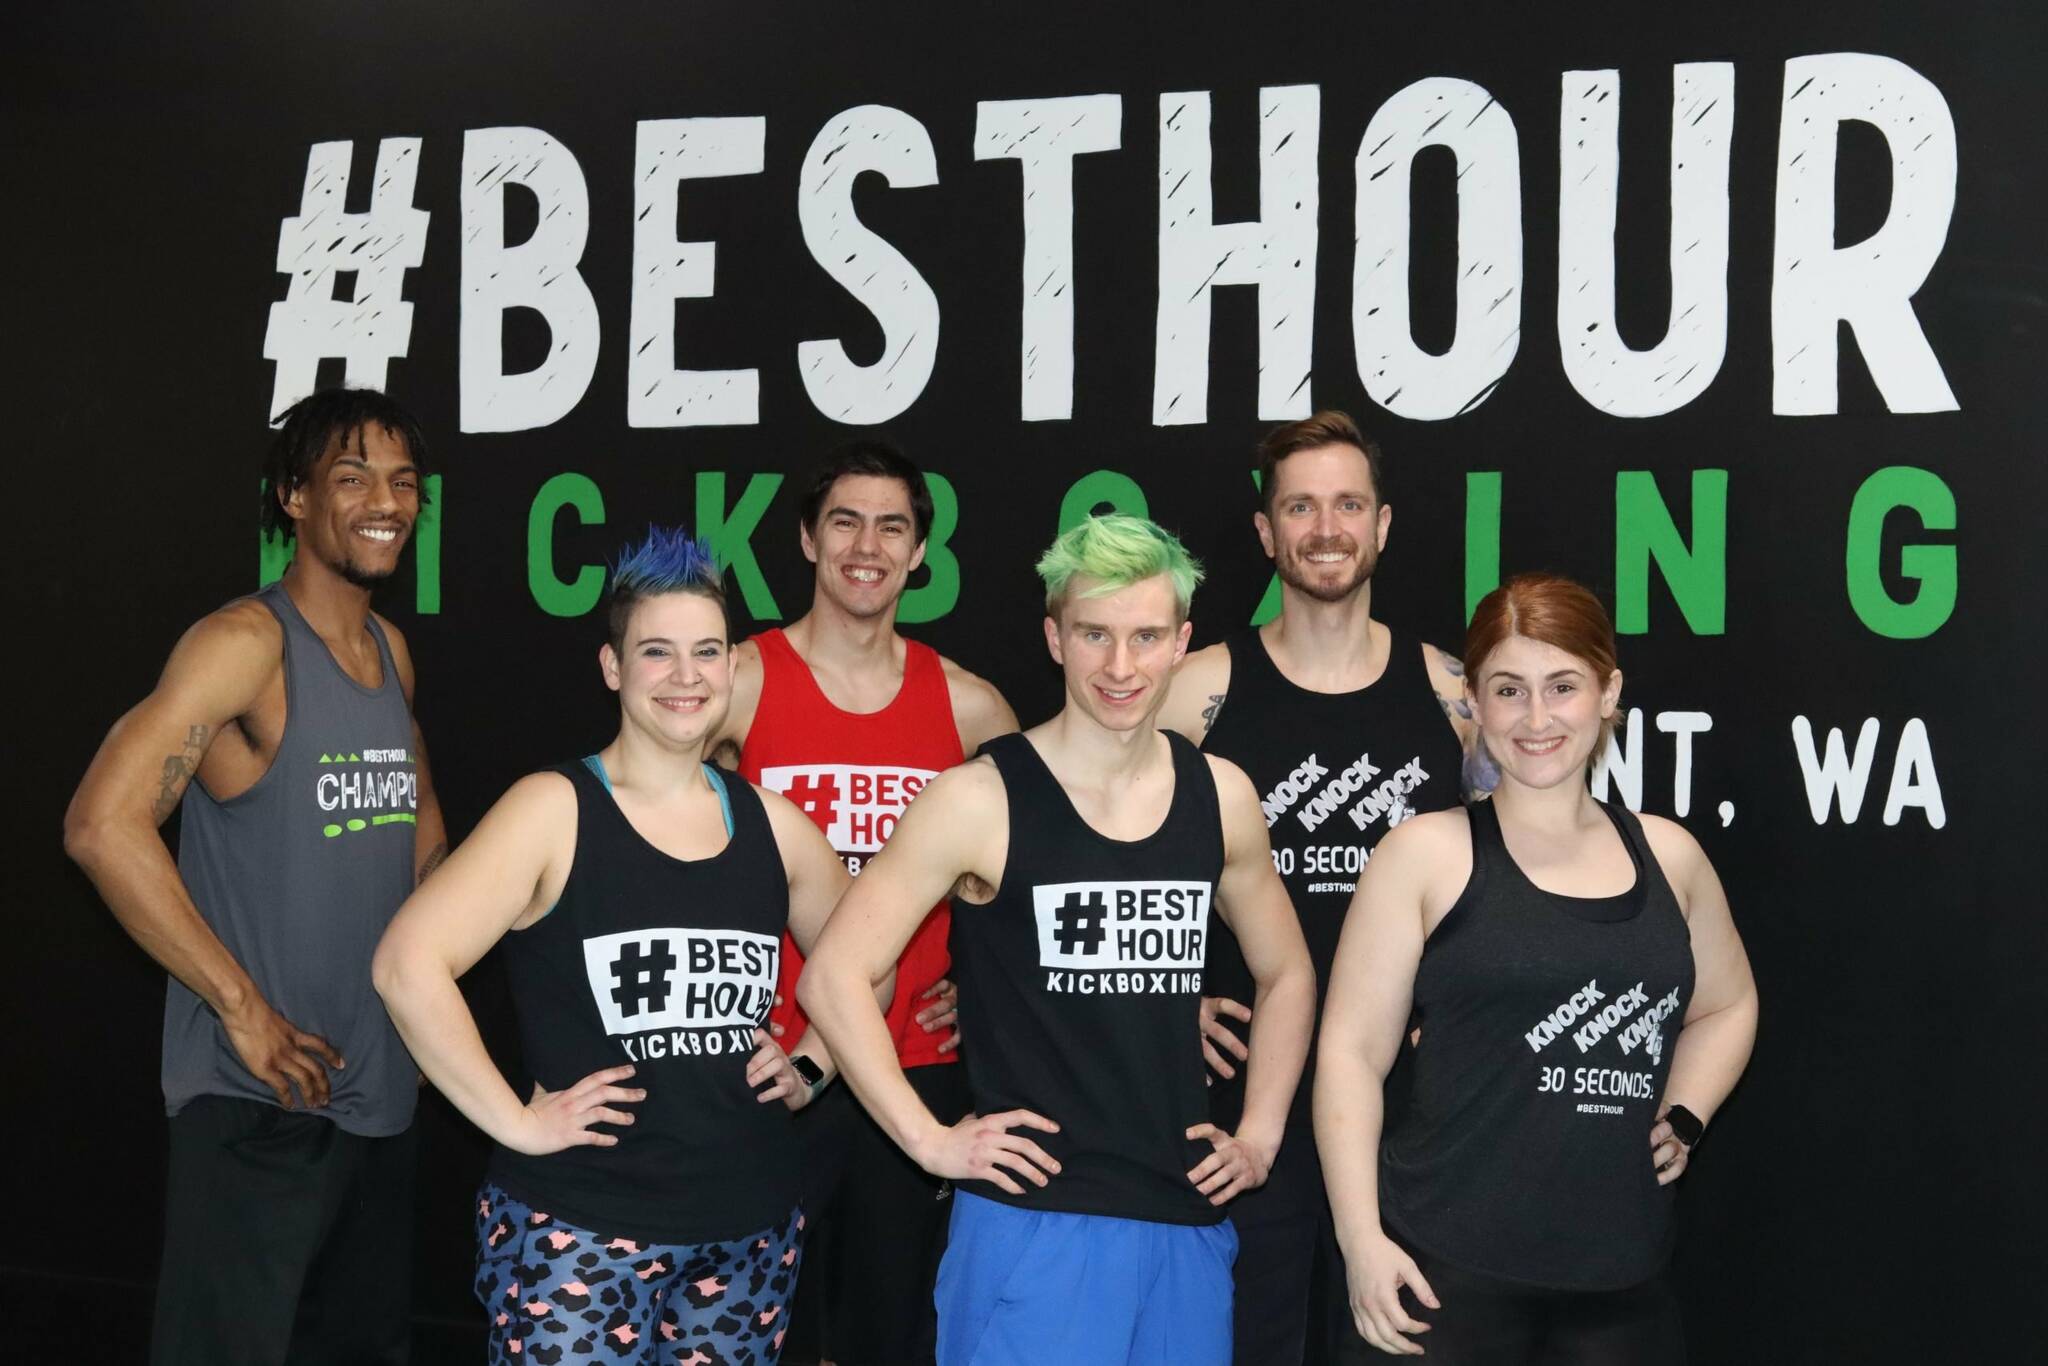 #BestHour Kickboxing voted fitness facility in Federal Way | Federal Way Mirror